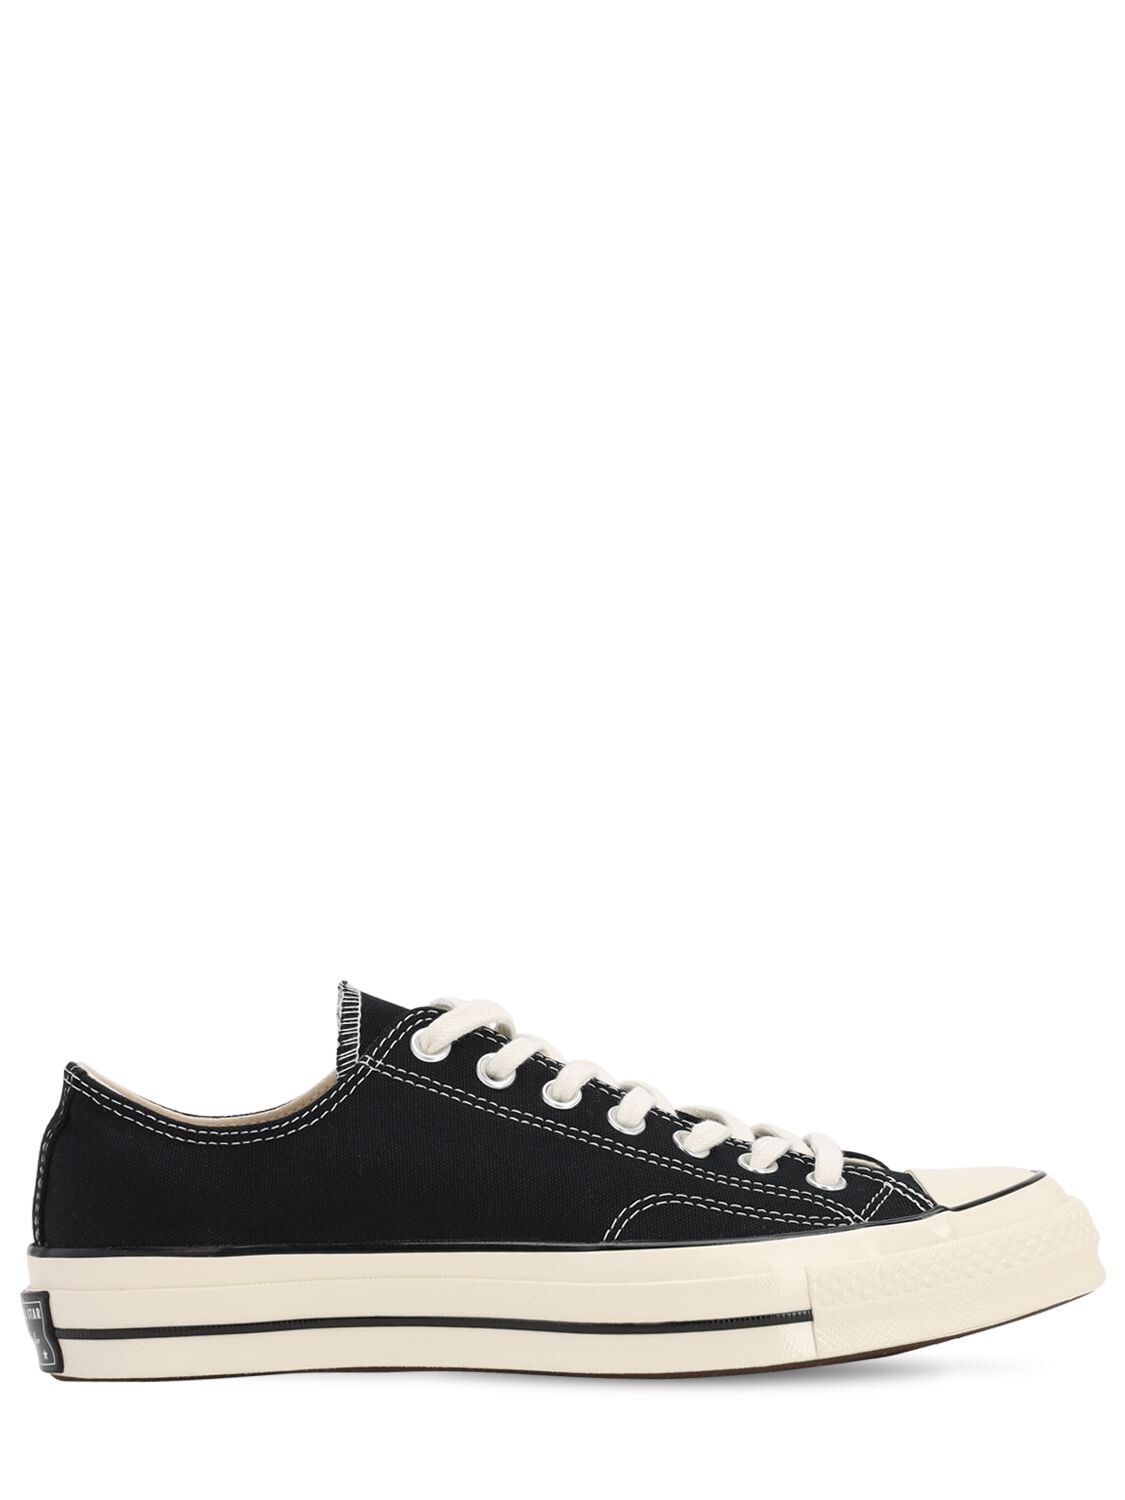 CONVERSE CHUCK 70 LOW SNEAKERS,71IWY6030-QKXBQ0S1